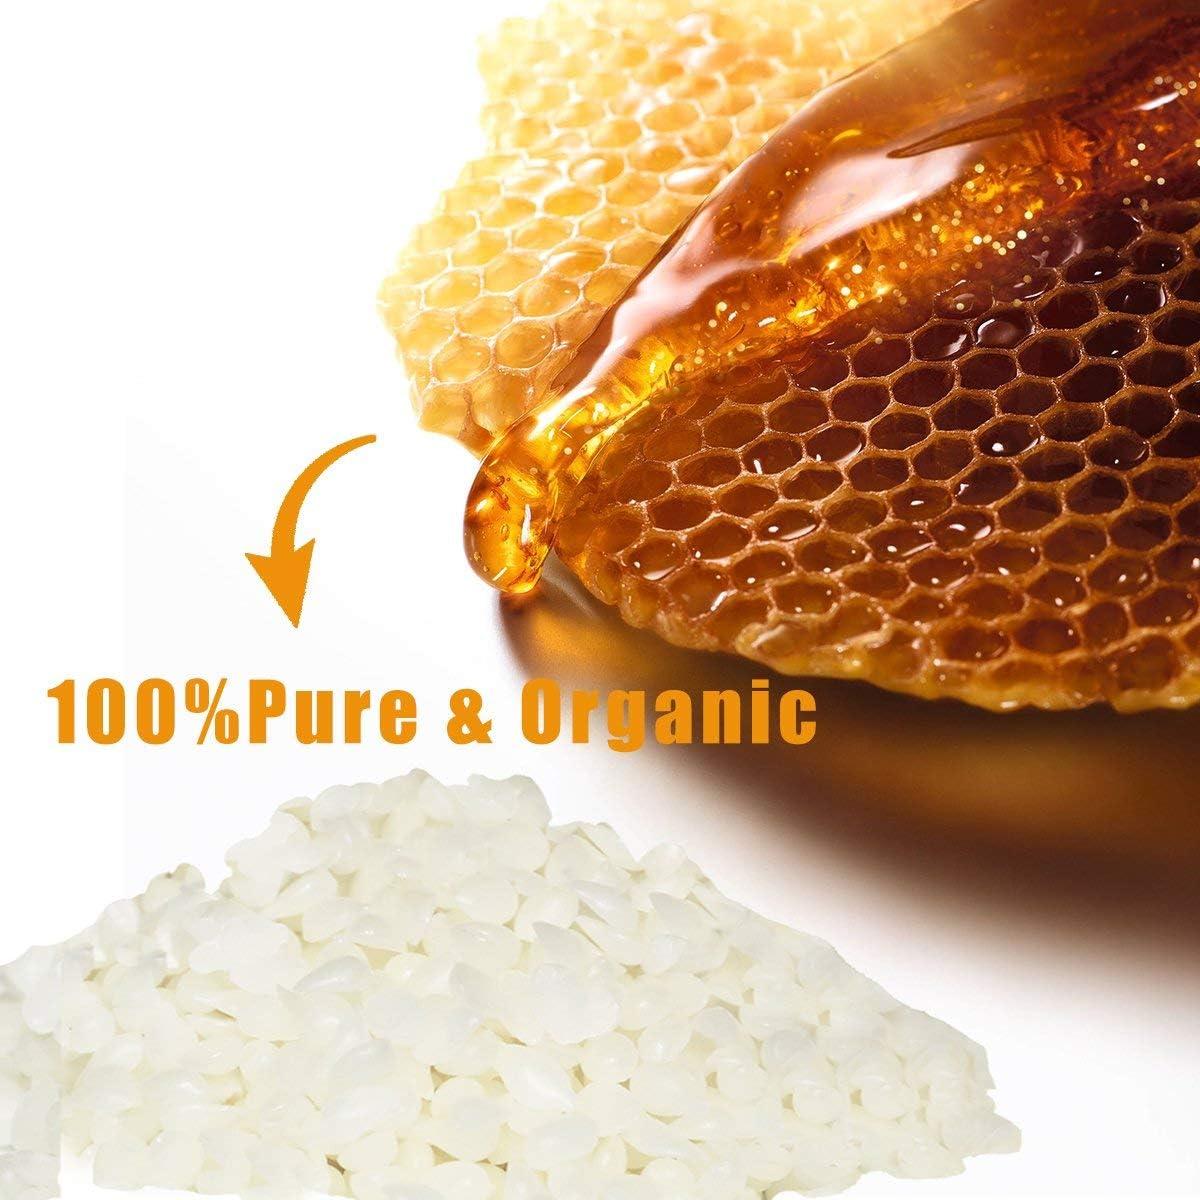 Howemon White Beeswax Pellets 2LB 100% Pure and Natural Triple Filtered for  Skin, Face, Body and Hair Care DIY Creams, Lotions, Lip Balm and Soap